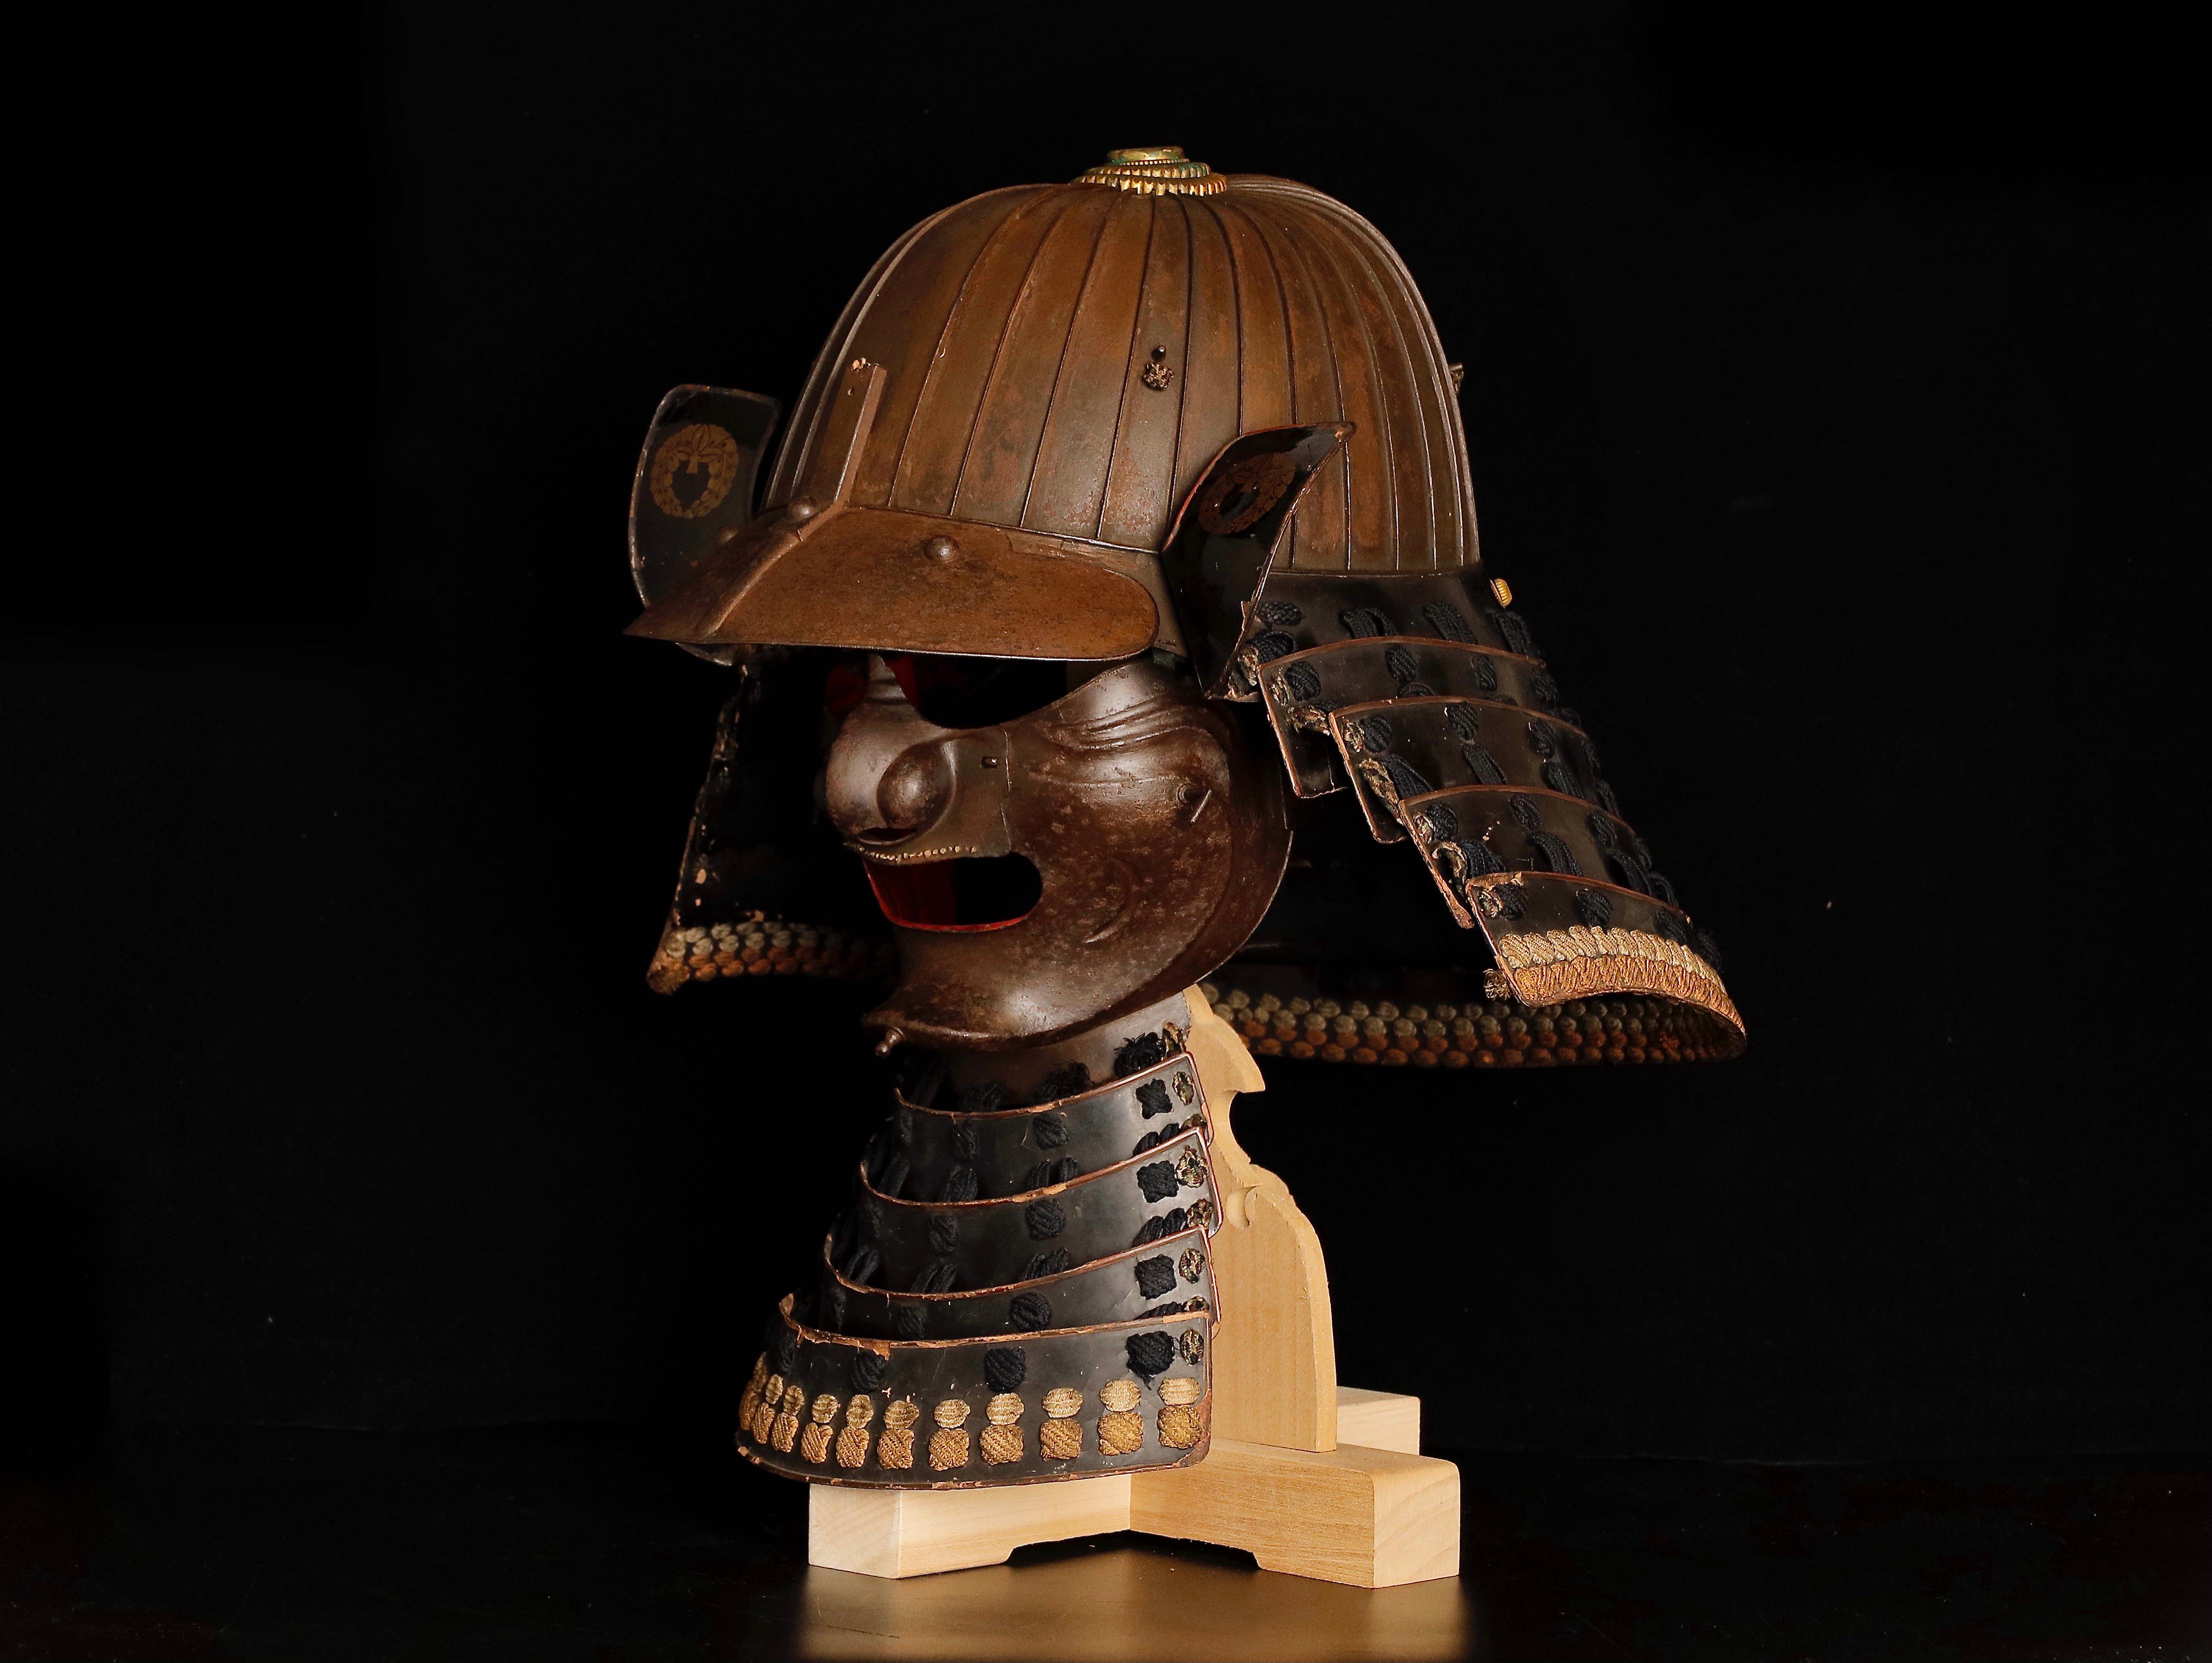 Edo-Era Samurai Helmet and Mask Set, an Authentic Piece of History from the 17th 1